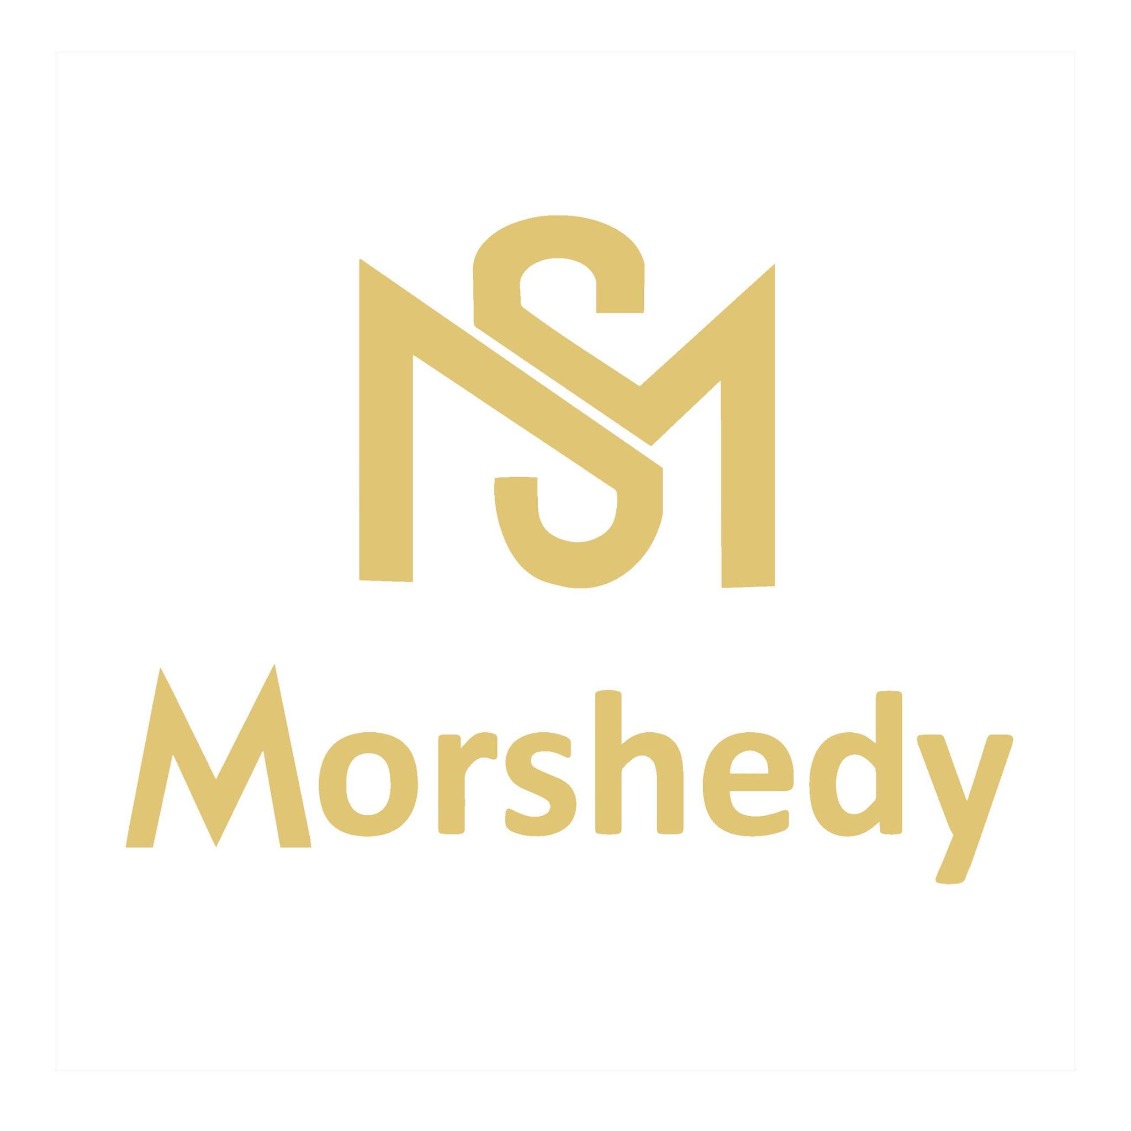 Up To 12 Months with 0% Interest / Morshedy